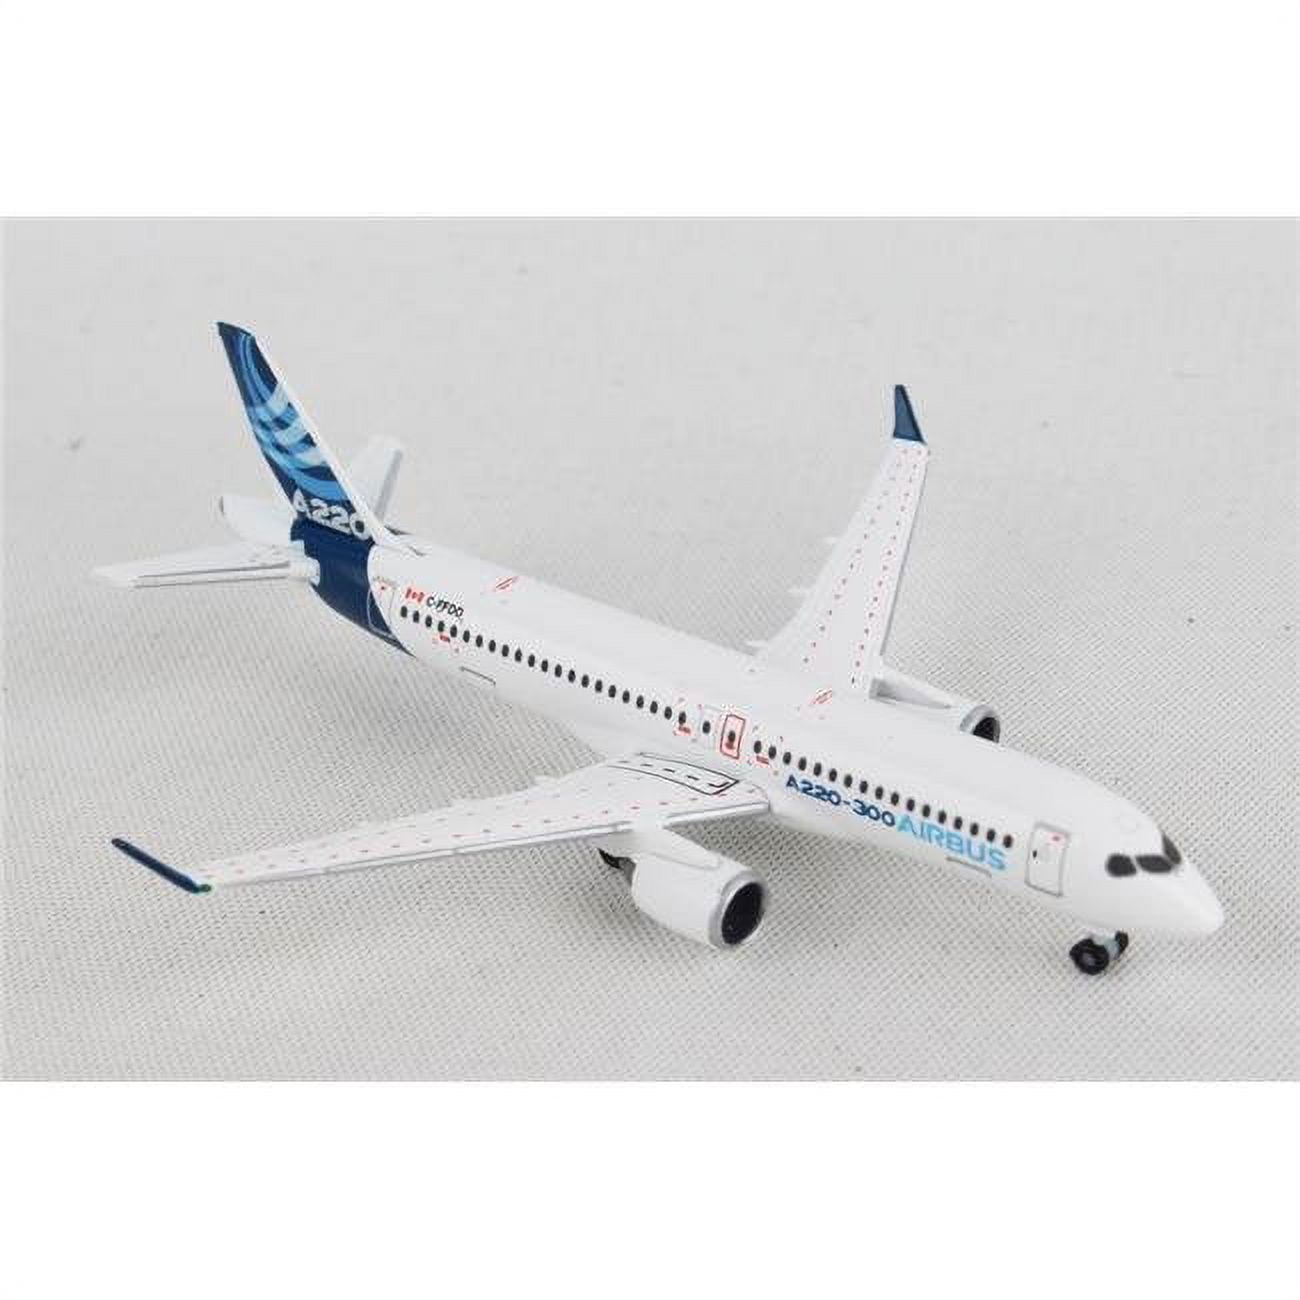 He532822 1 By 500 Scale Airbus House A220-300 Model Aircraft